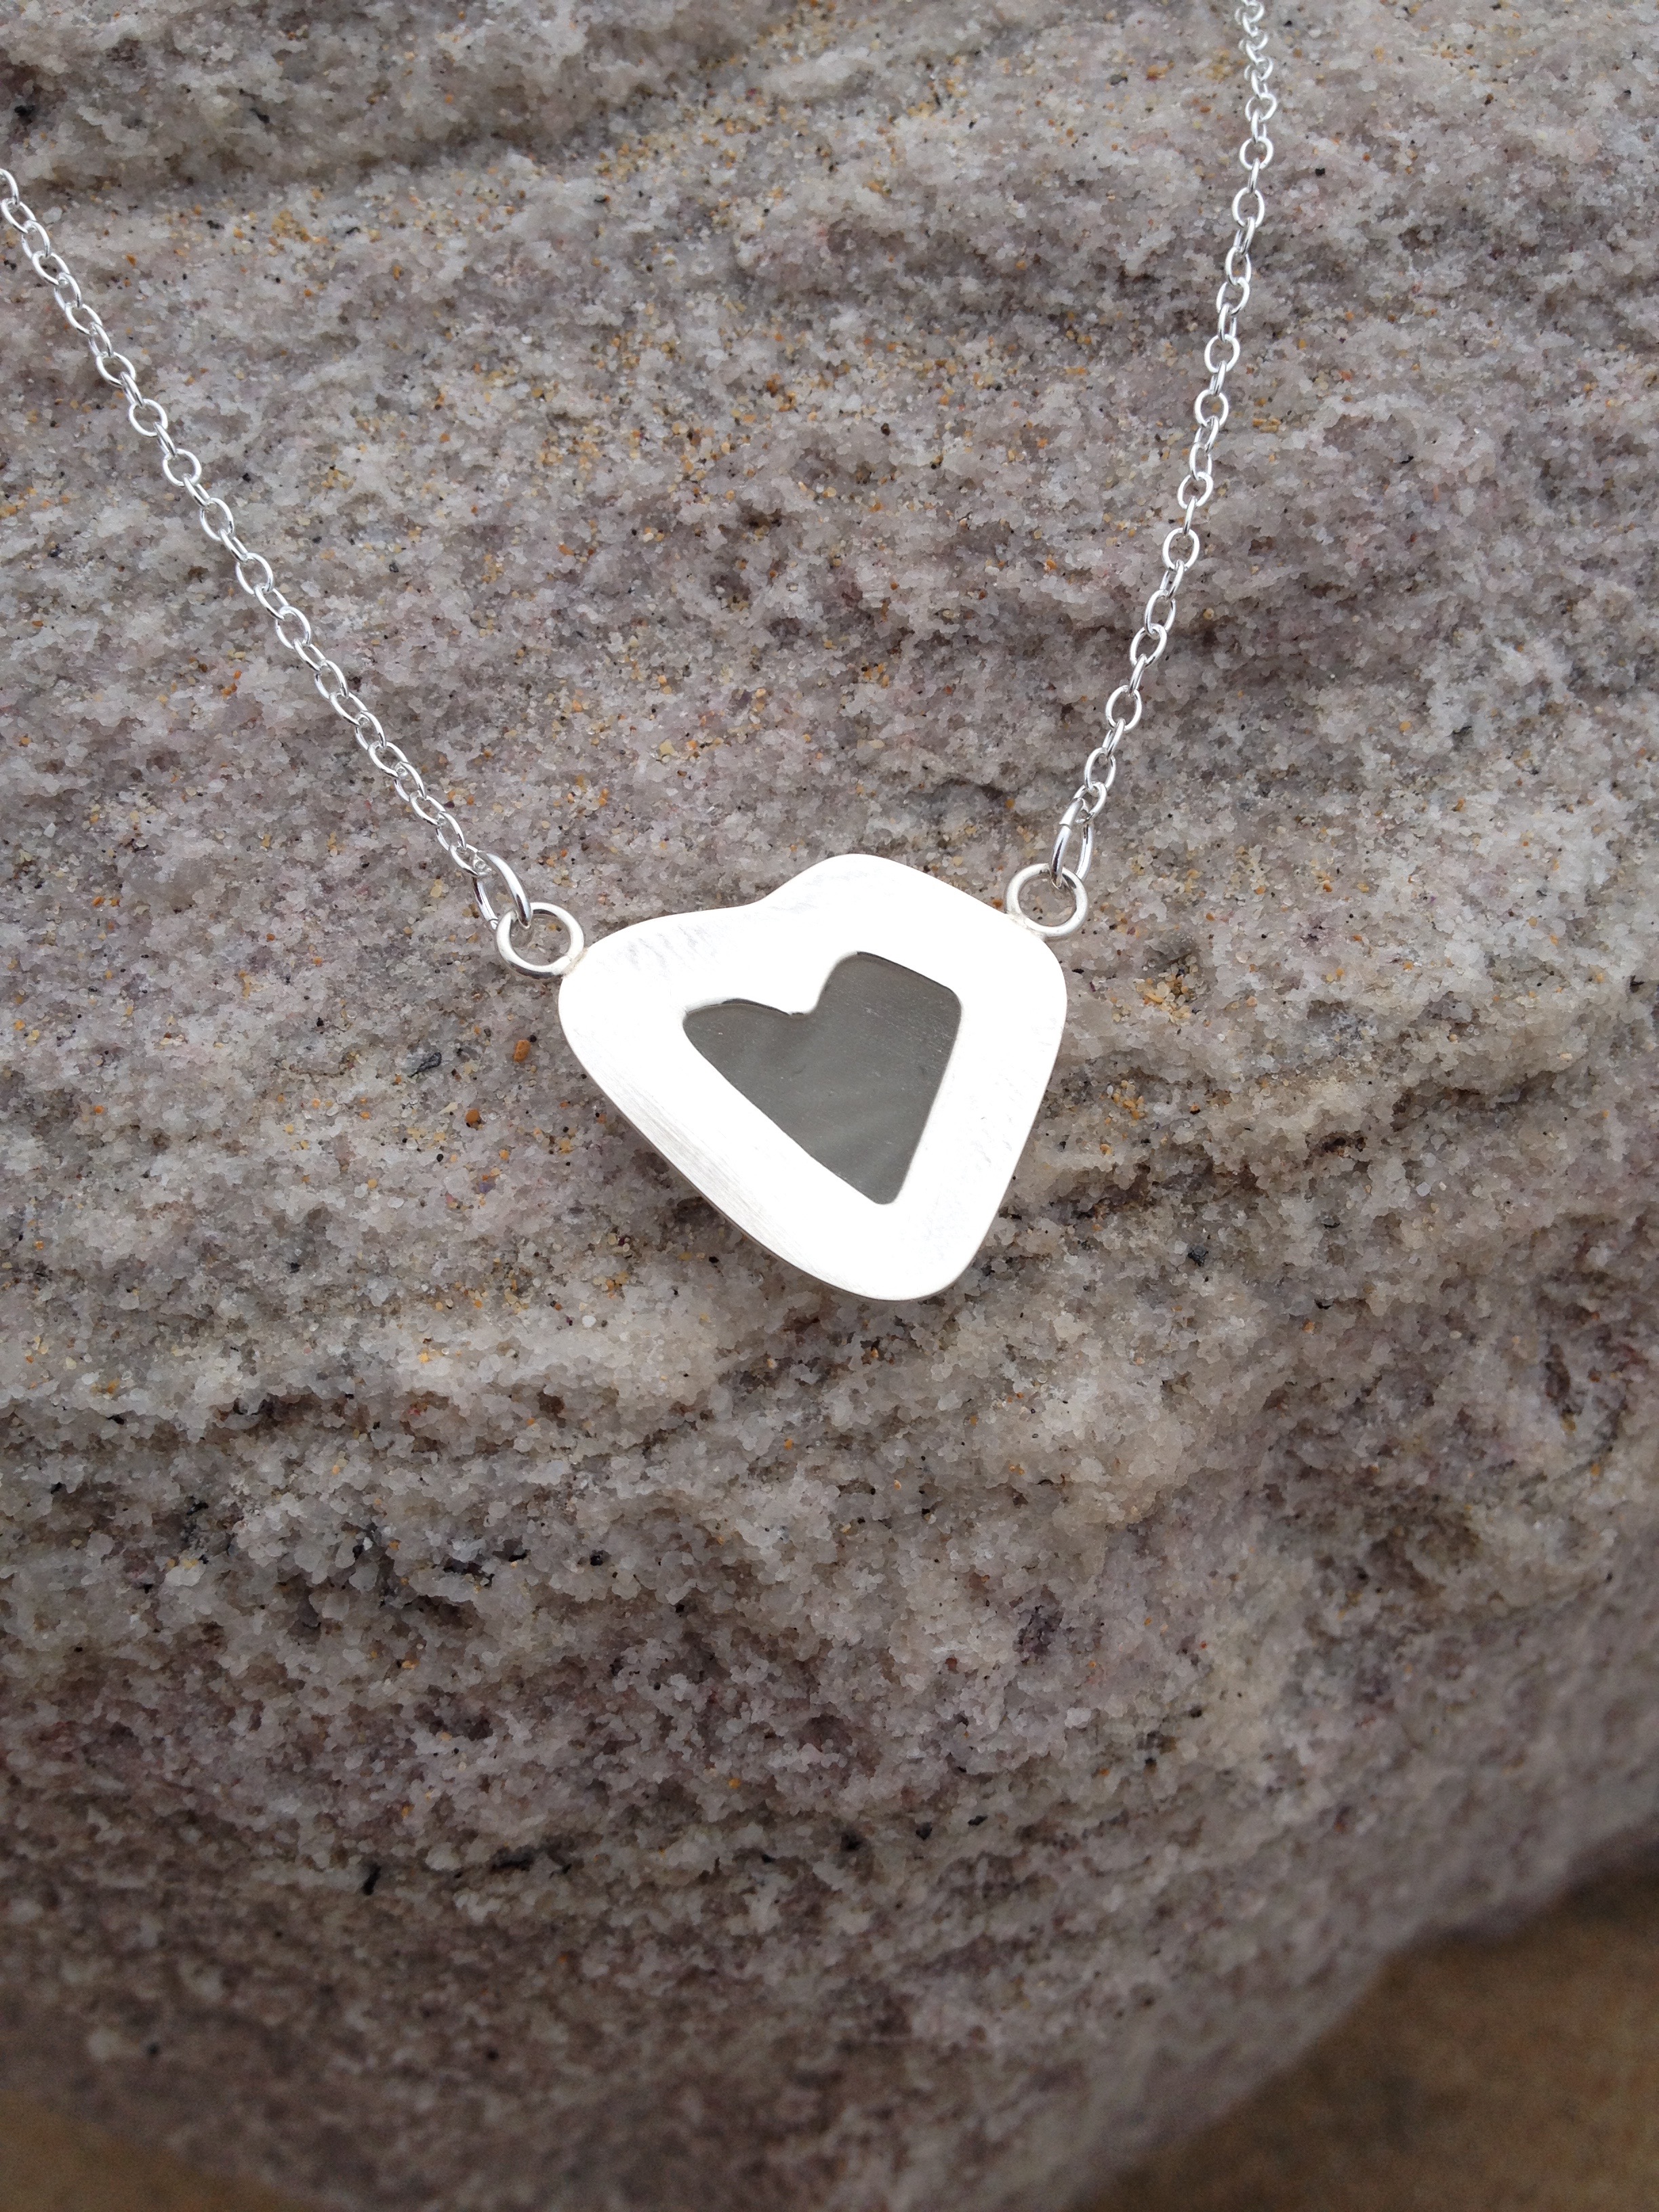 Heart Shaped Sea Crystal Necklace